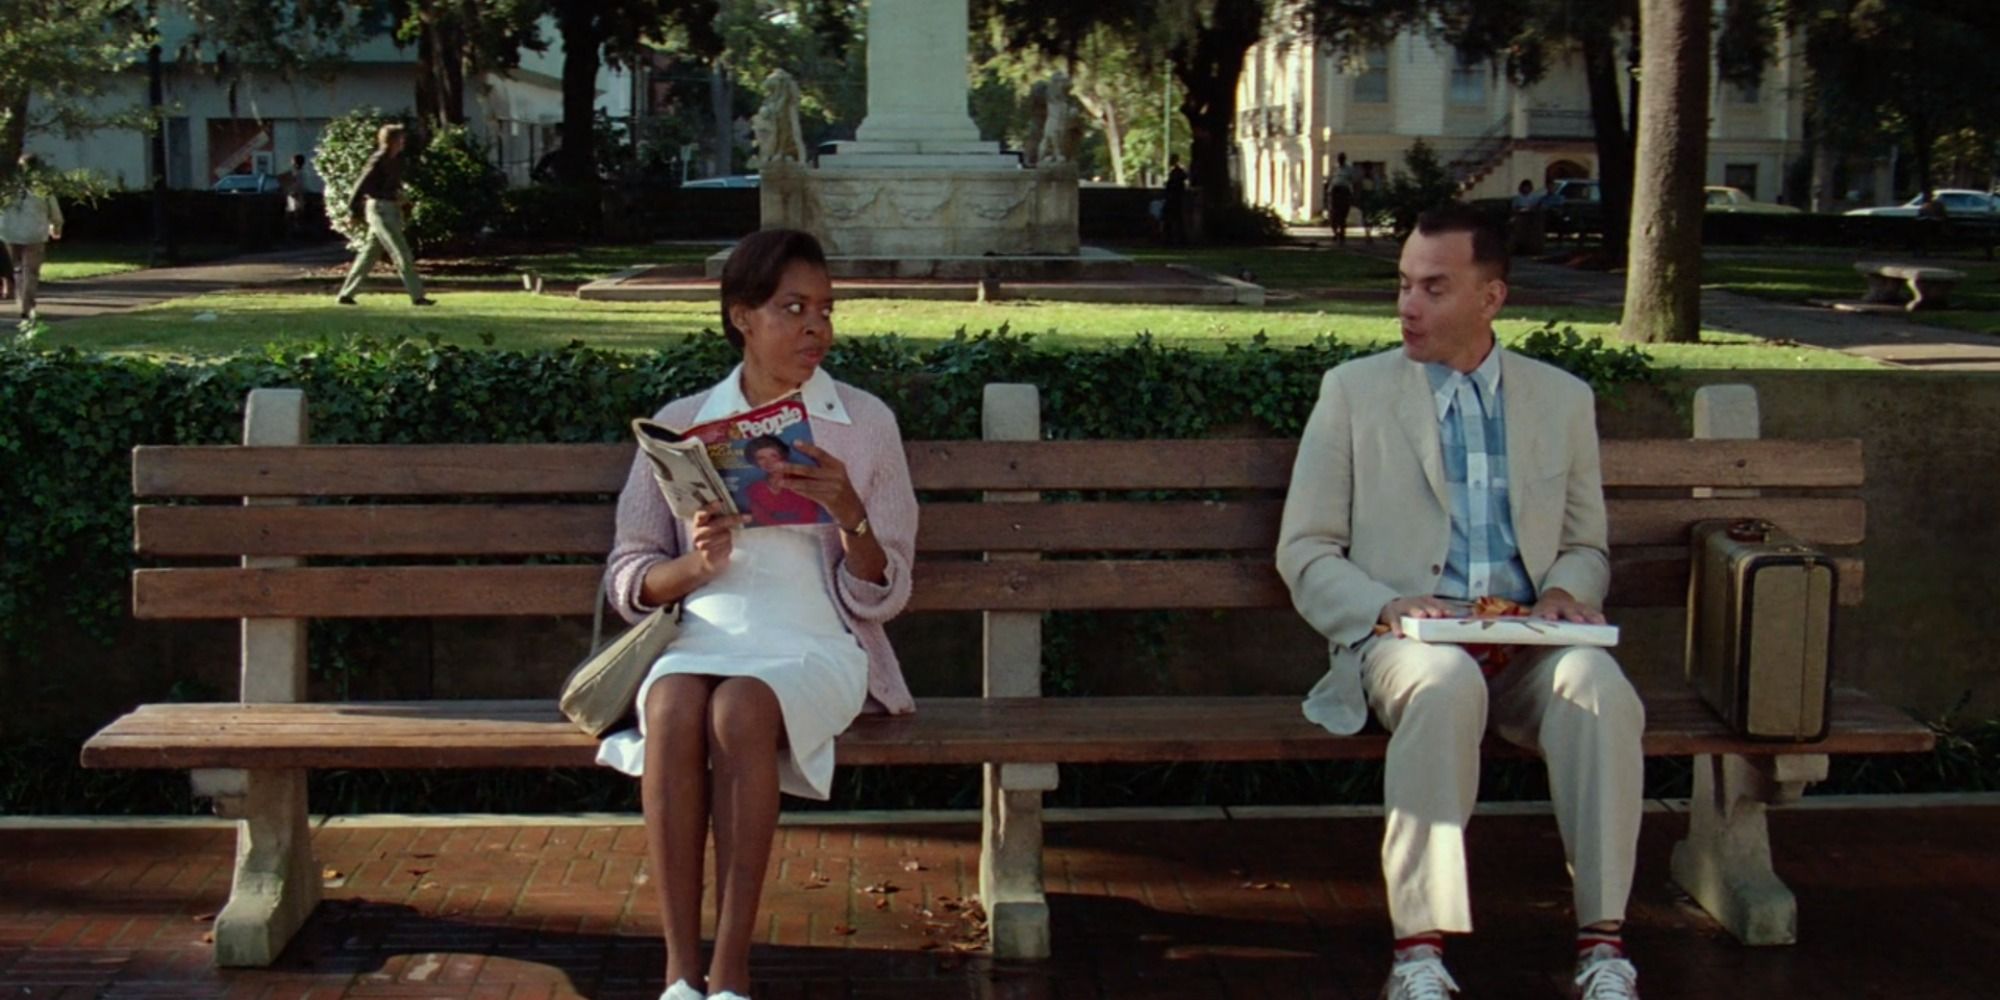 What Disabilities Does Forrest Gump Have?